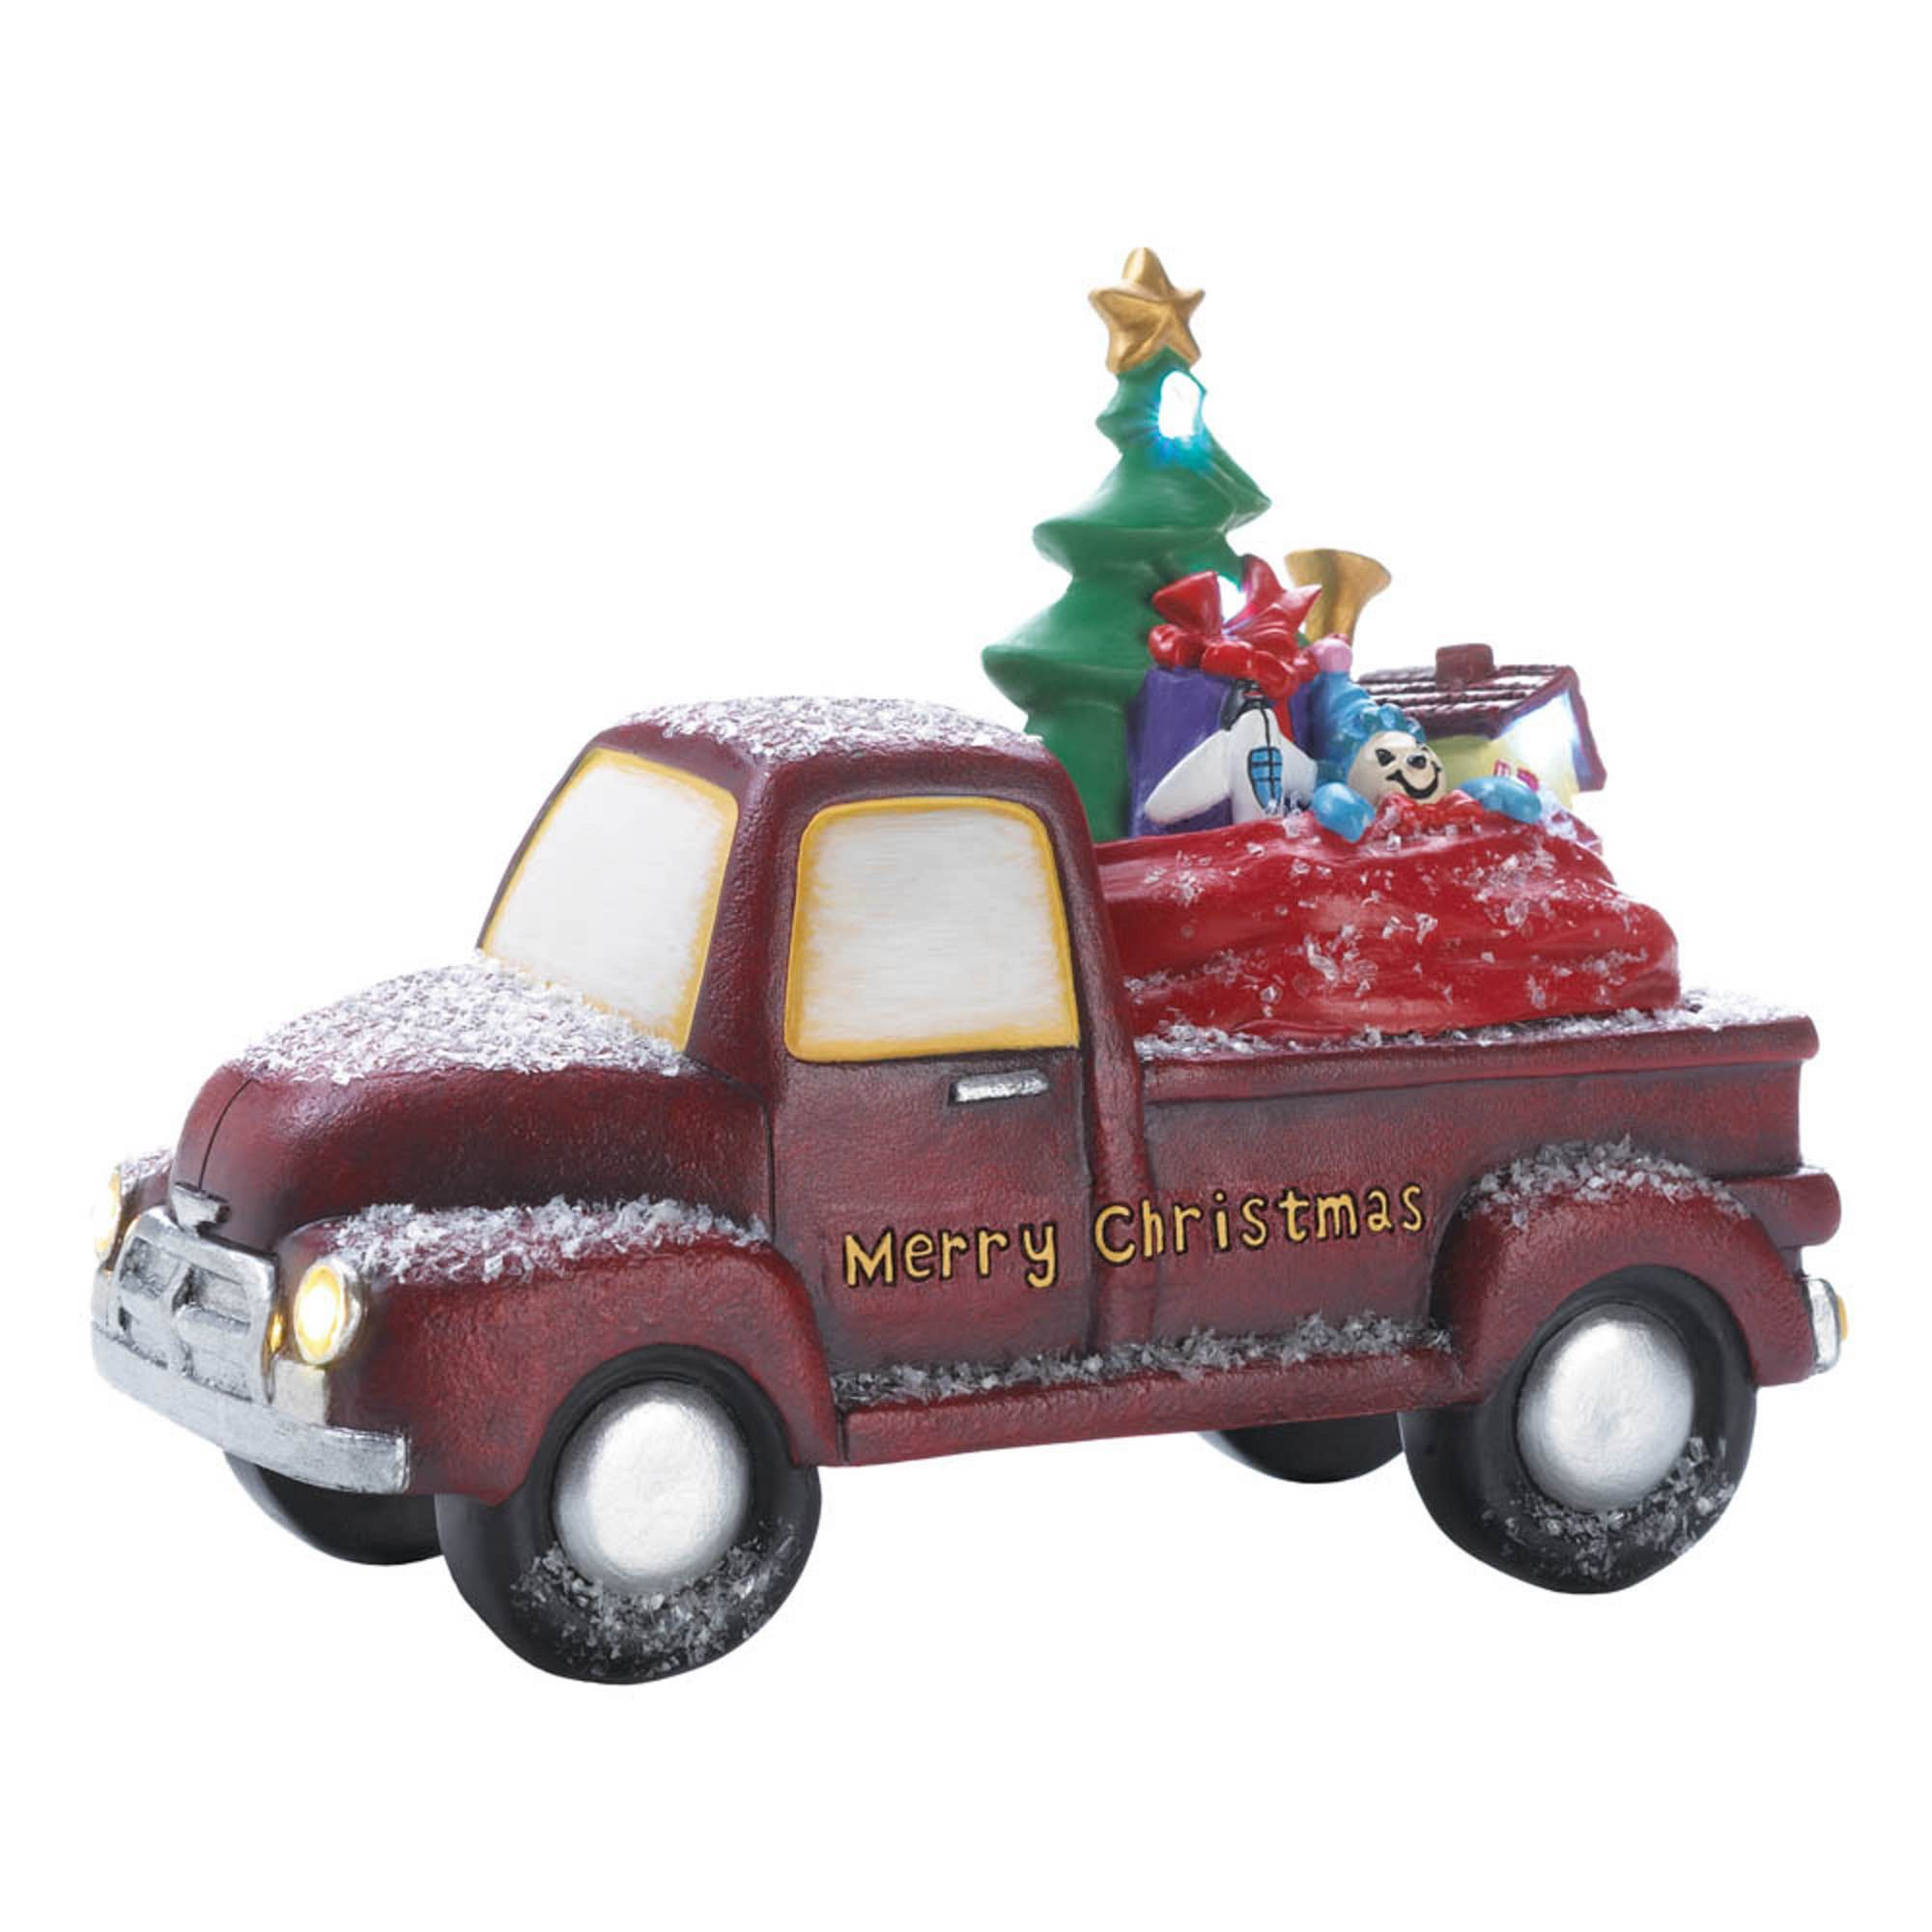 Zingz & Thingz Light-Up Toy Delivery Truck Christmas Figurine - 6" - Red and Green